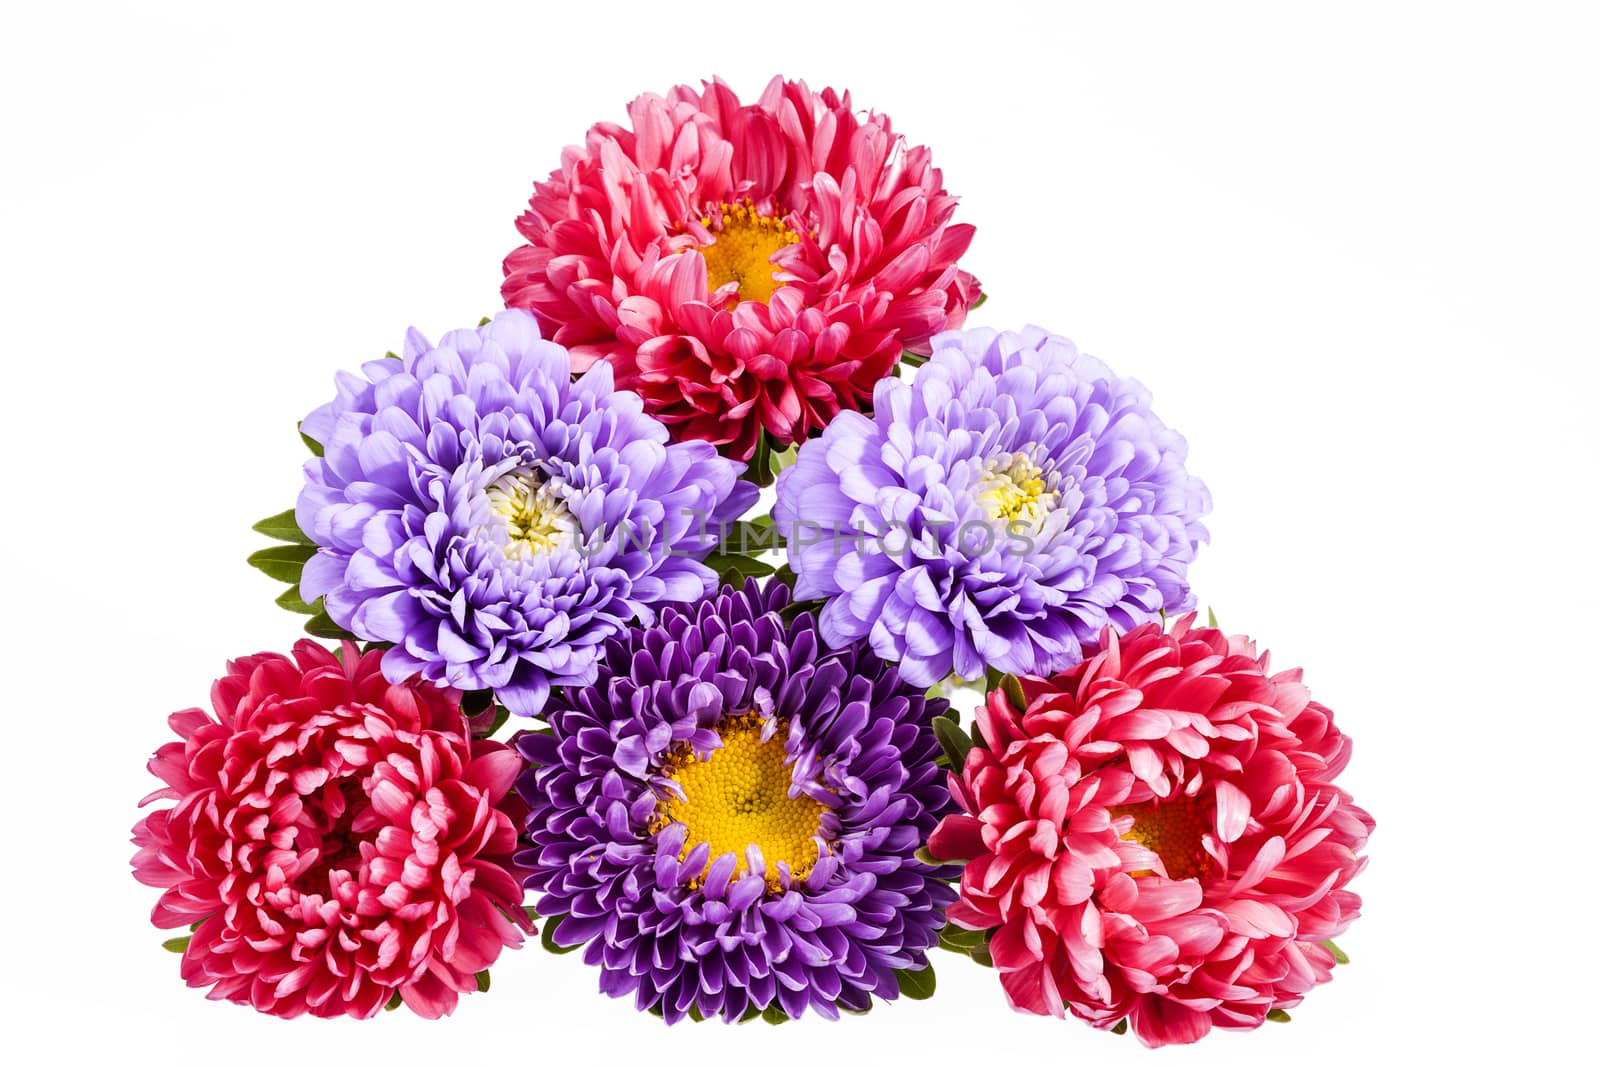 
Bouquet of colorful aster flowers on white background, close up
